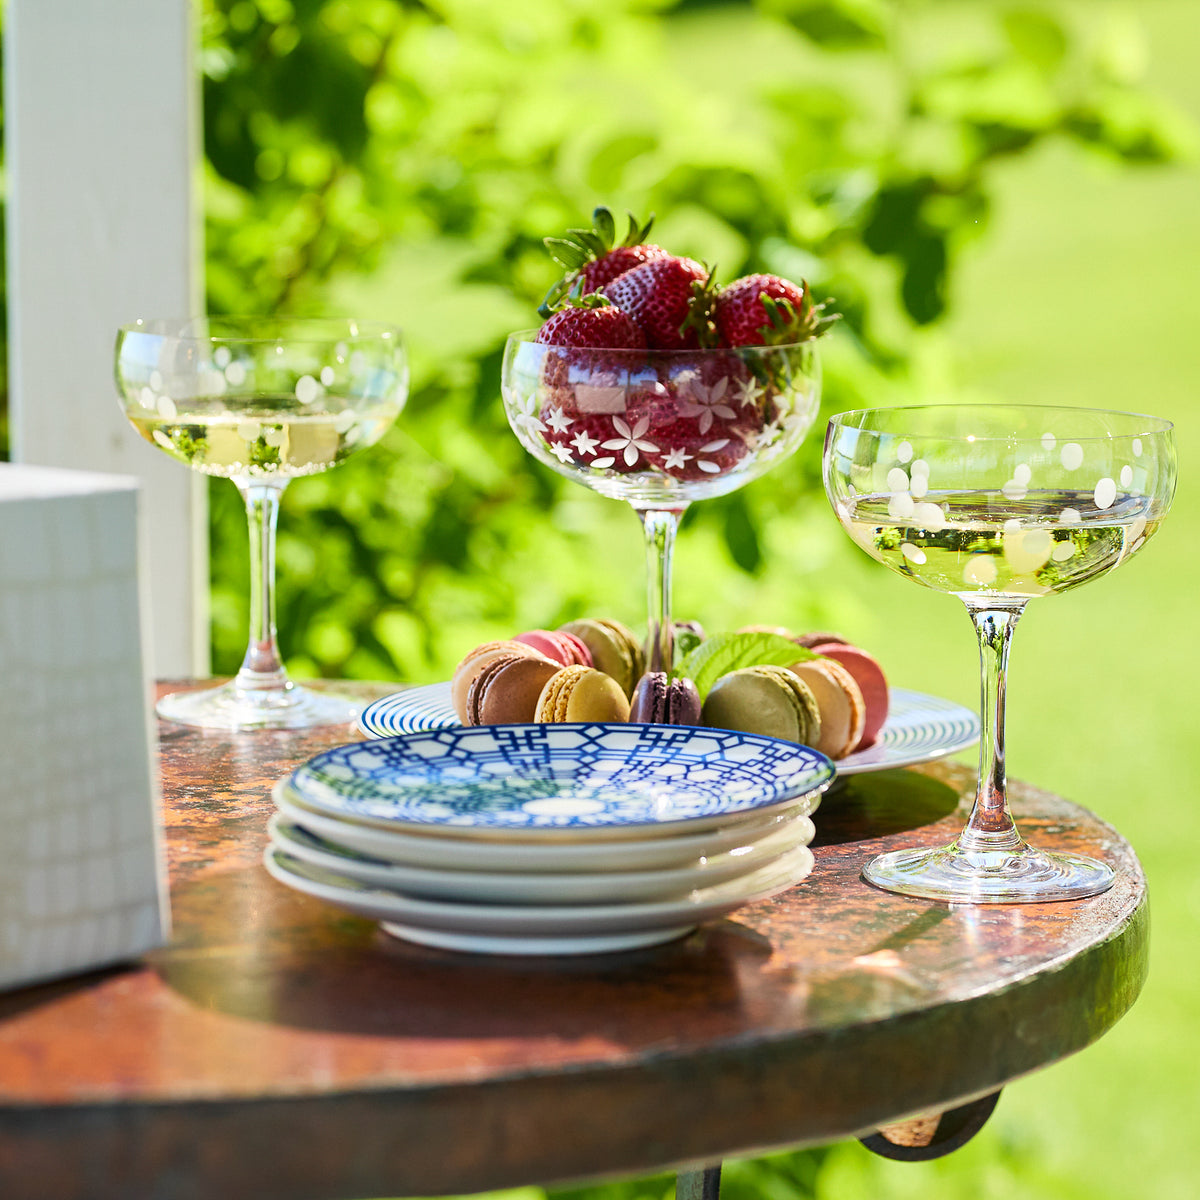 A table set with two glasses of lead-free Chatham Pop Coupe Cocktail Glasses by Caskata, a dessert glass filled with strawberries, a stack of blue and white plates from the Chatham Collection, and colorful macarons in an outdoor setting with lush greenery.